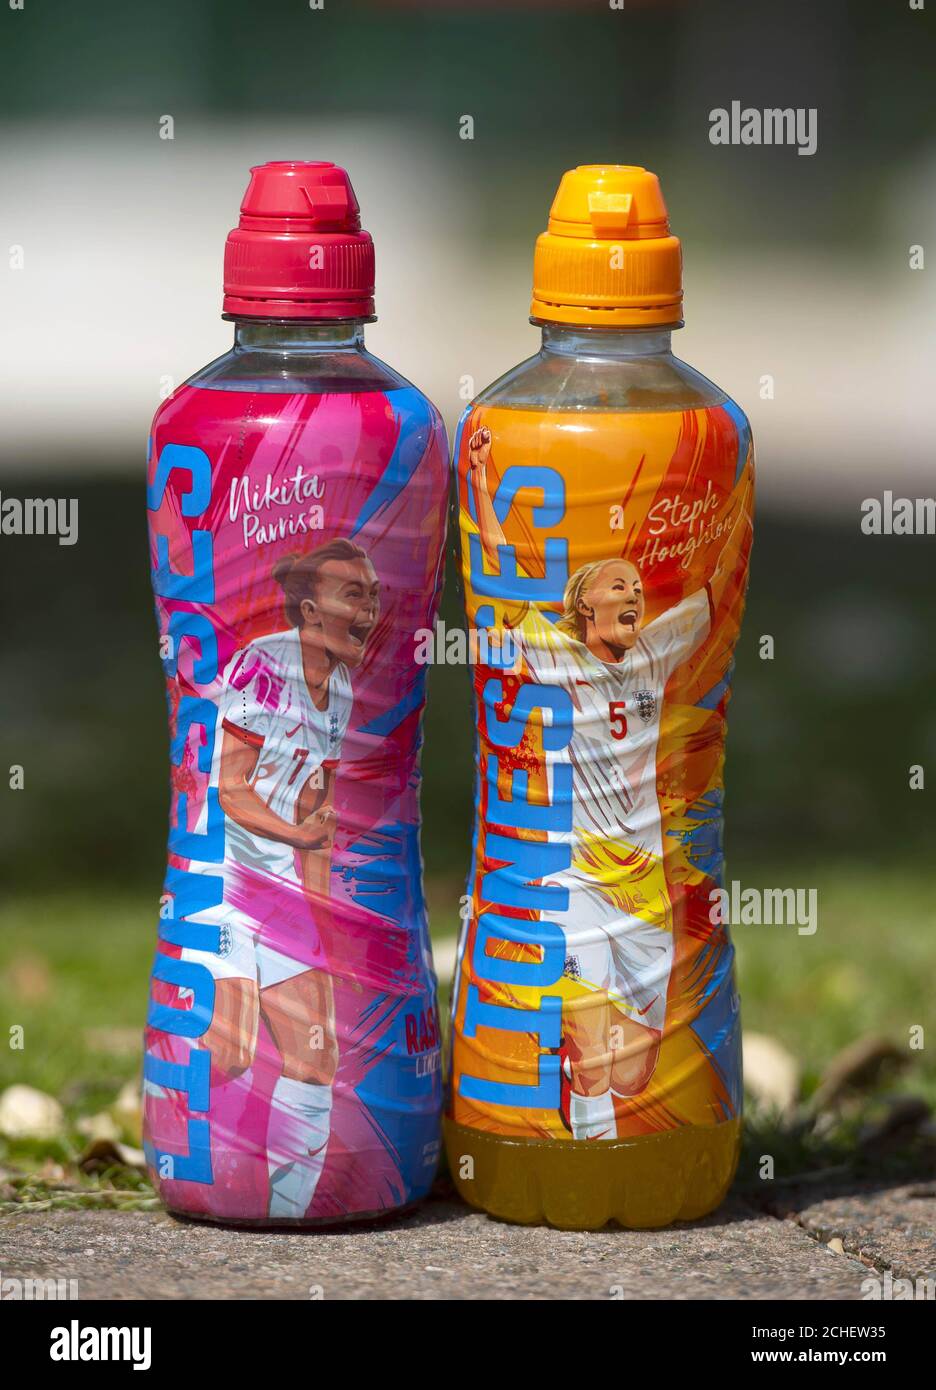 2 drinks bottles celebrating England women’s football stars, created by Lucozade Sport in support of the England Lionesses and the women’s game in general. Stock Photo